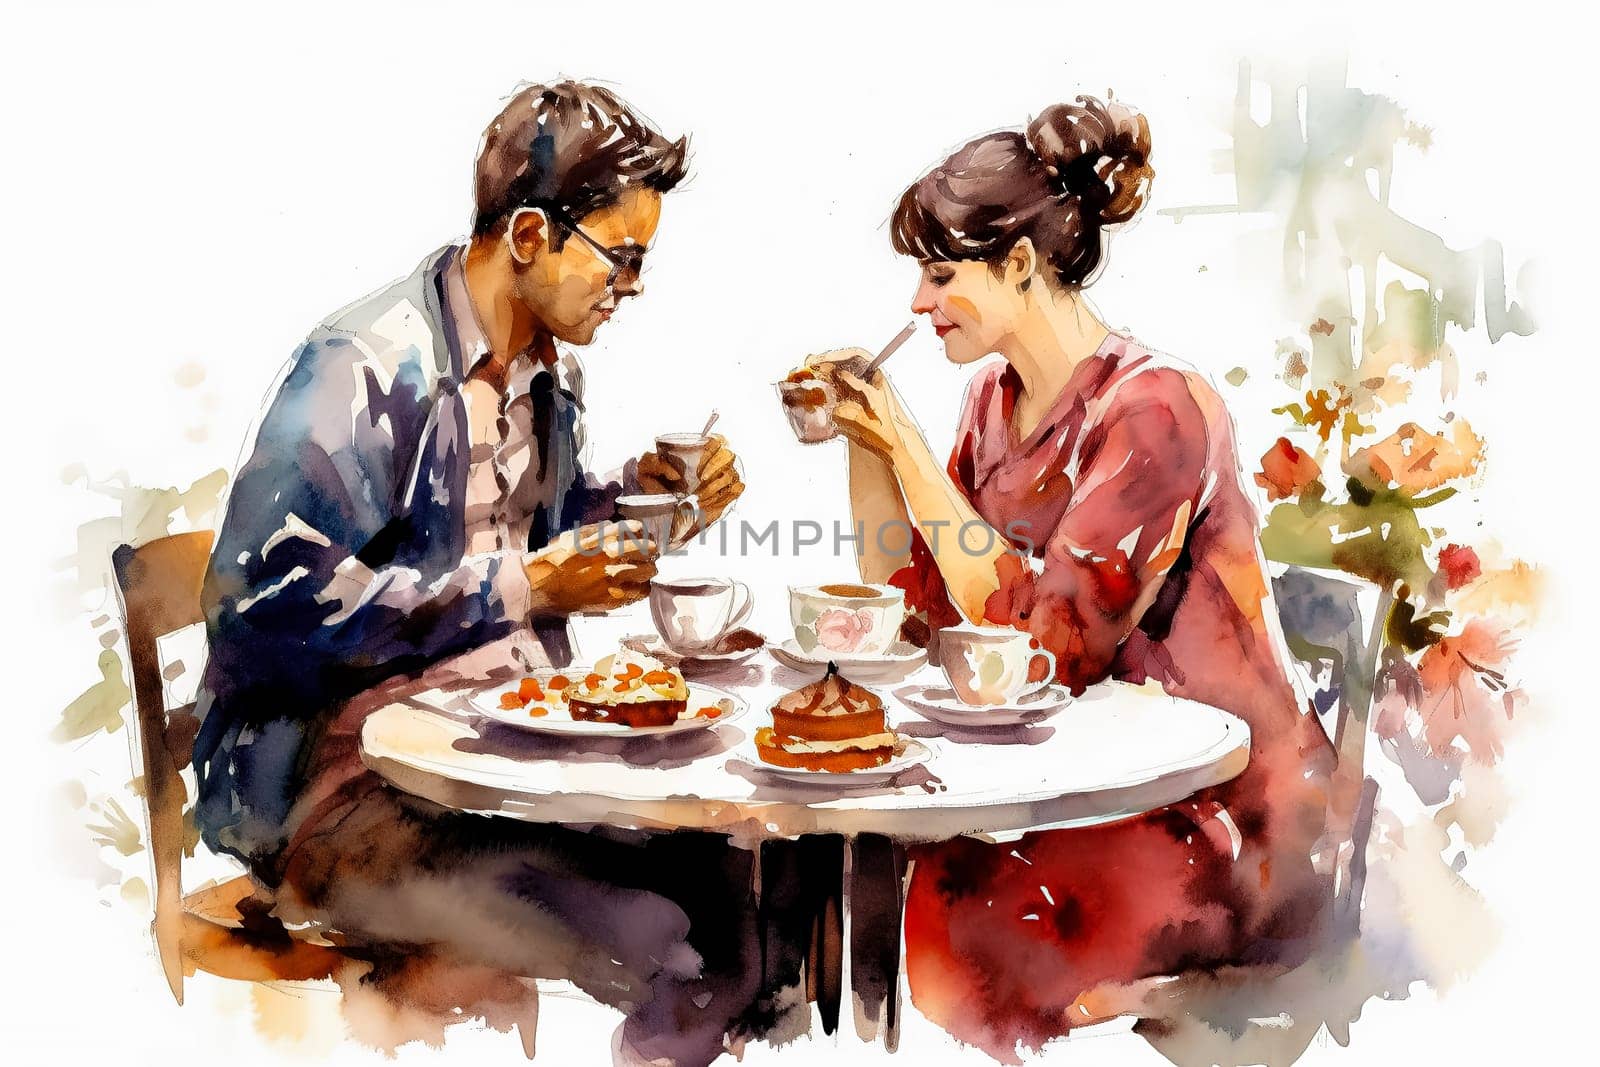 a watercolor illustration portrays a couple in love having breakfast in a charming cafe. by Alla_Morozova93